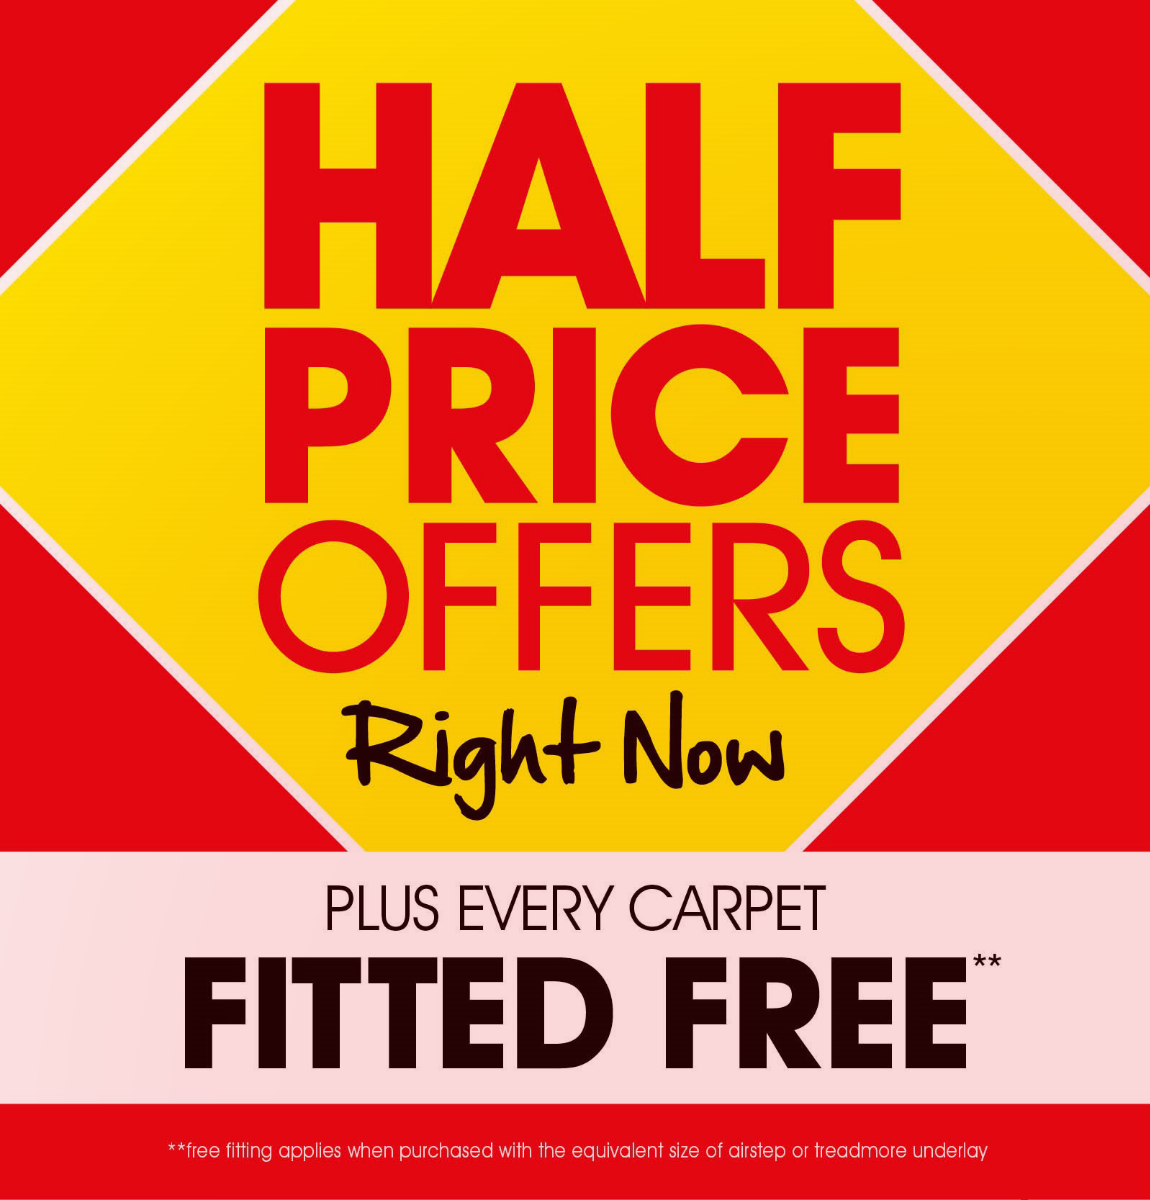 Half_price_fitted_free_M